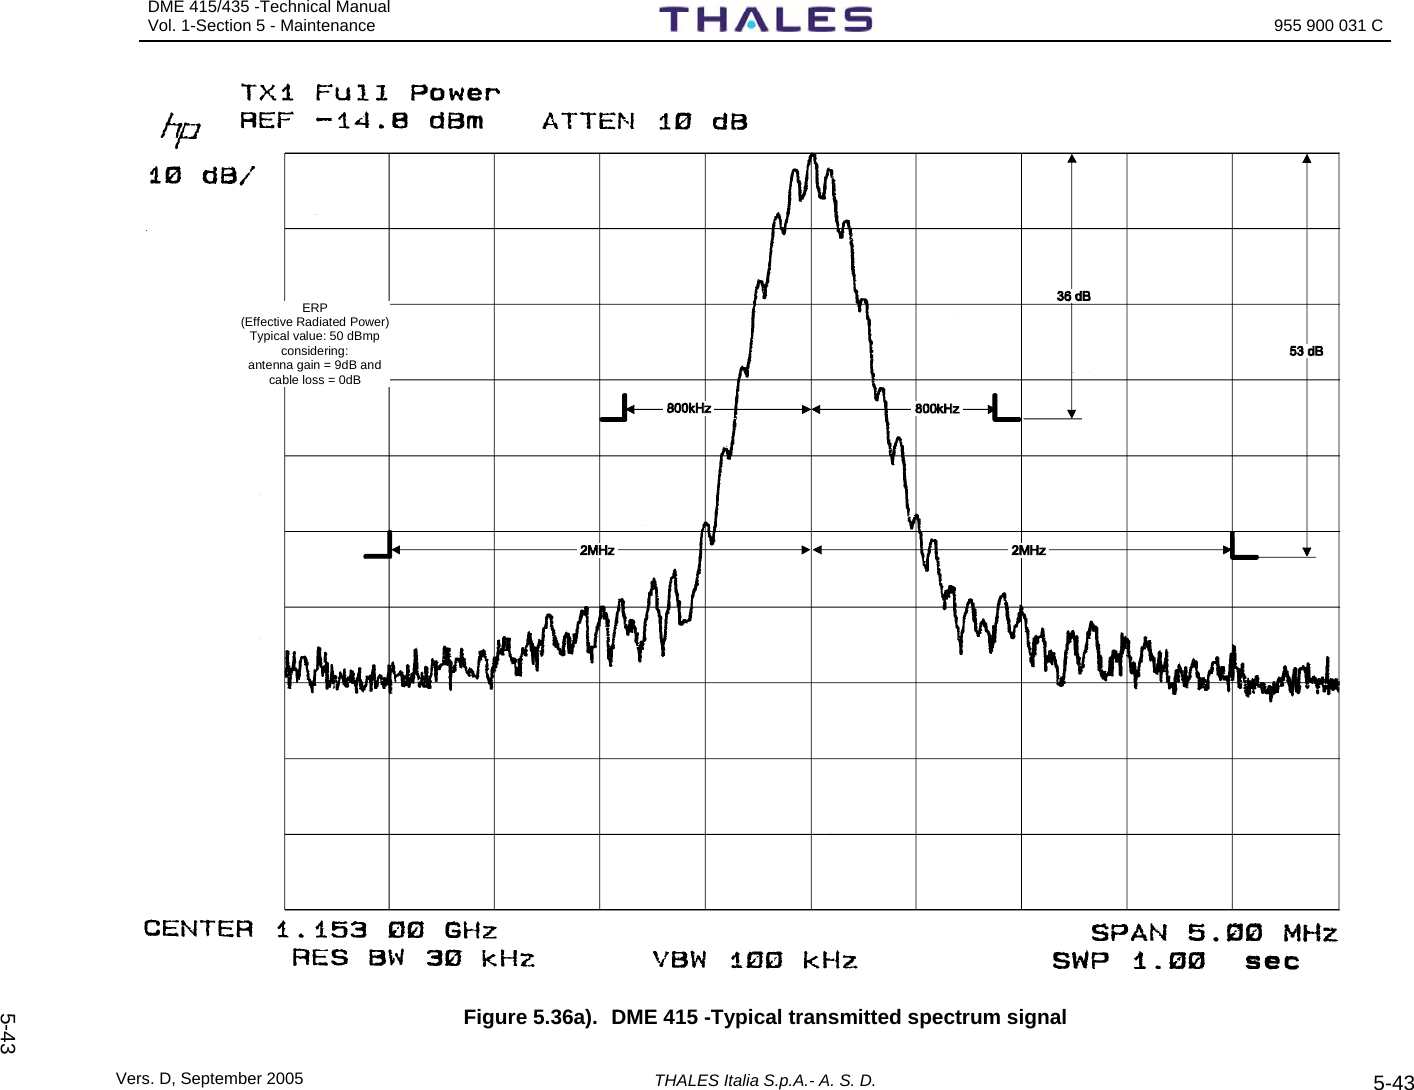 DME 415/435 -Technical Manual Vol. 1-Section 5 - Maintenance    955 900 031 C Vers. D, September 2005  THALES Italia S.p.A.- A. S. D. 5-43 5-43ERP(Effective Radiated Power)Typical value: 50 dBmpconsidering: antenna gain = 9dB andcable loss = 0dB Figure 5.36a).  DME 415 -Typical transmitted spectrum signal 